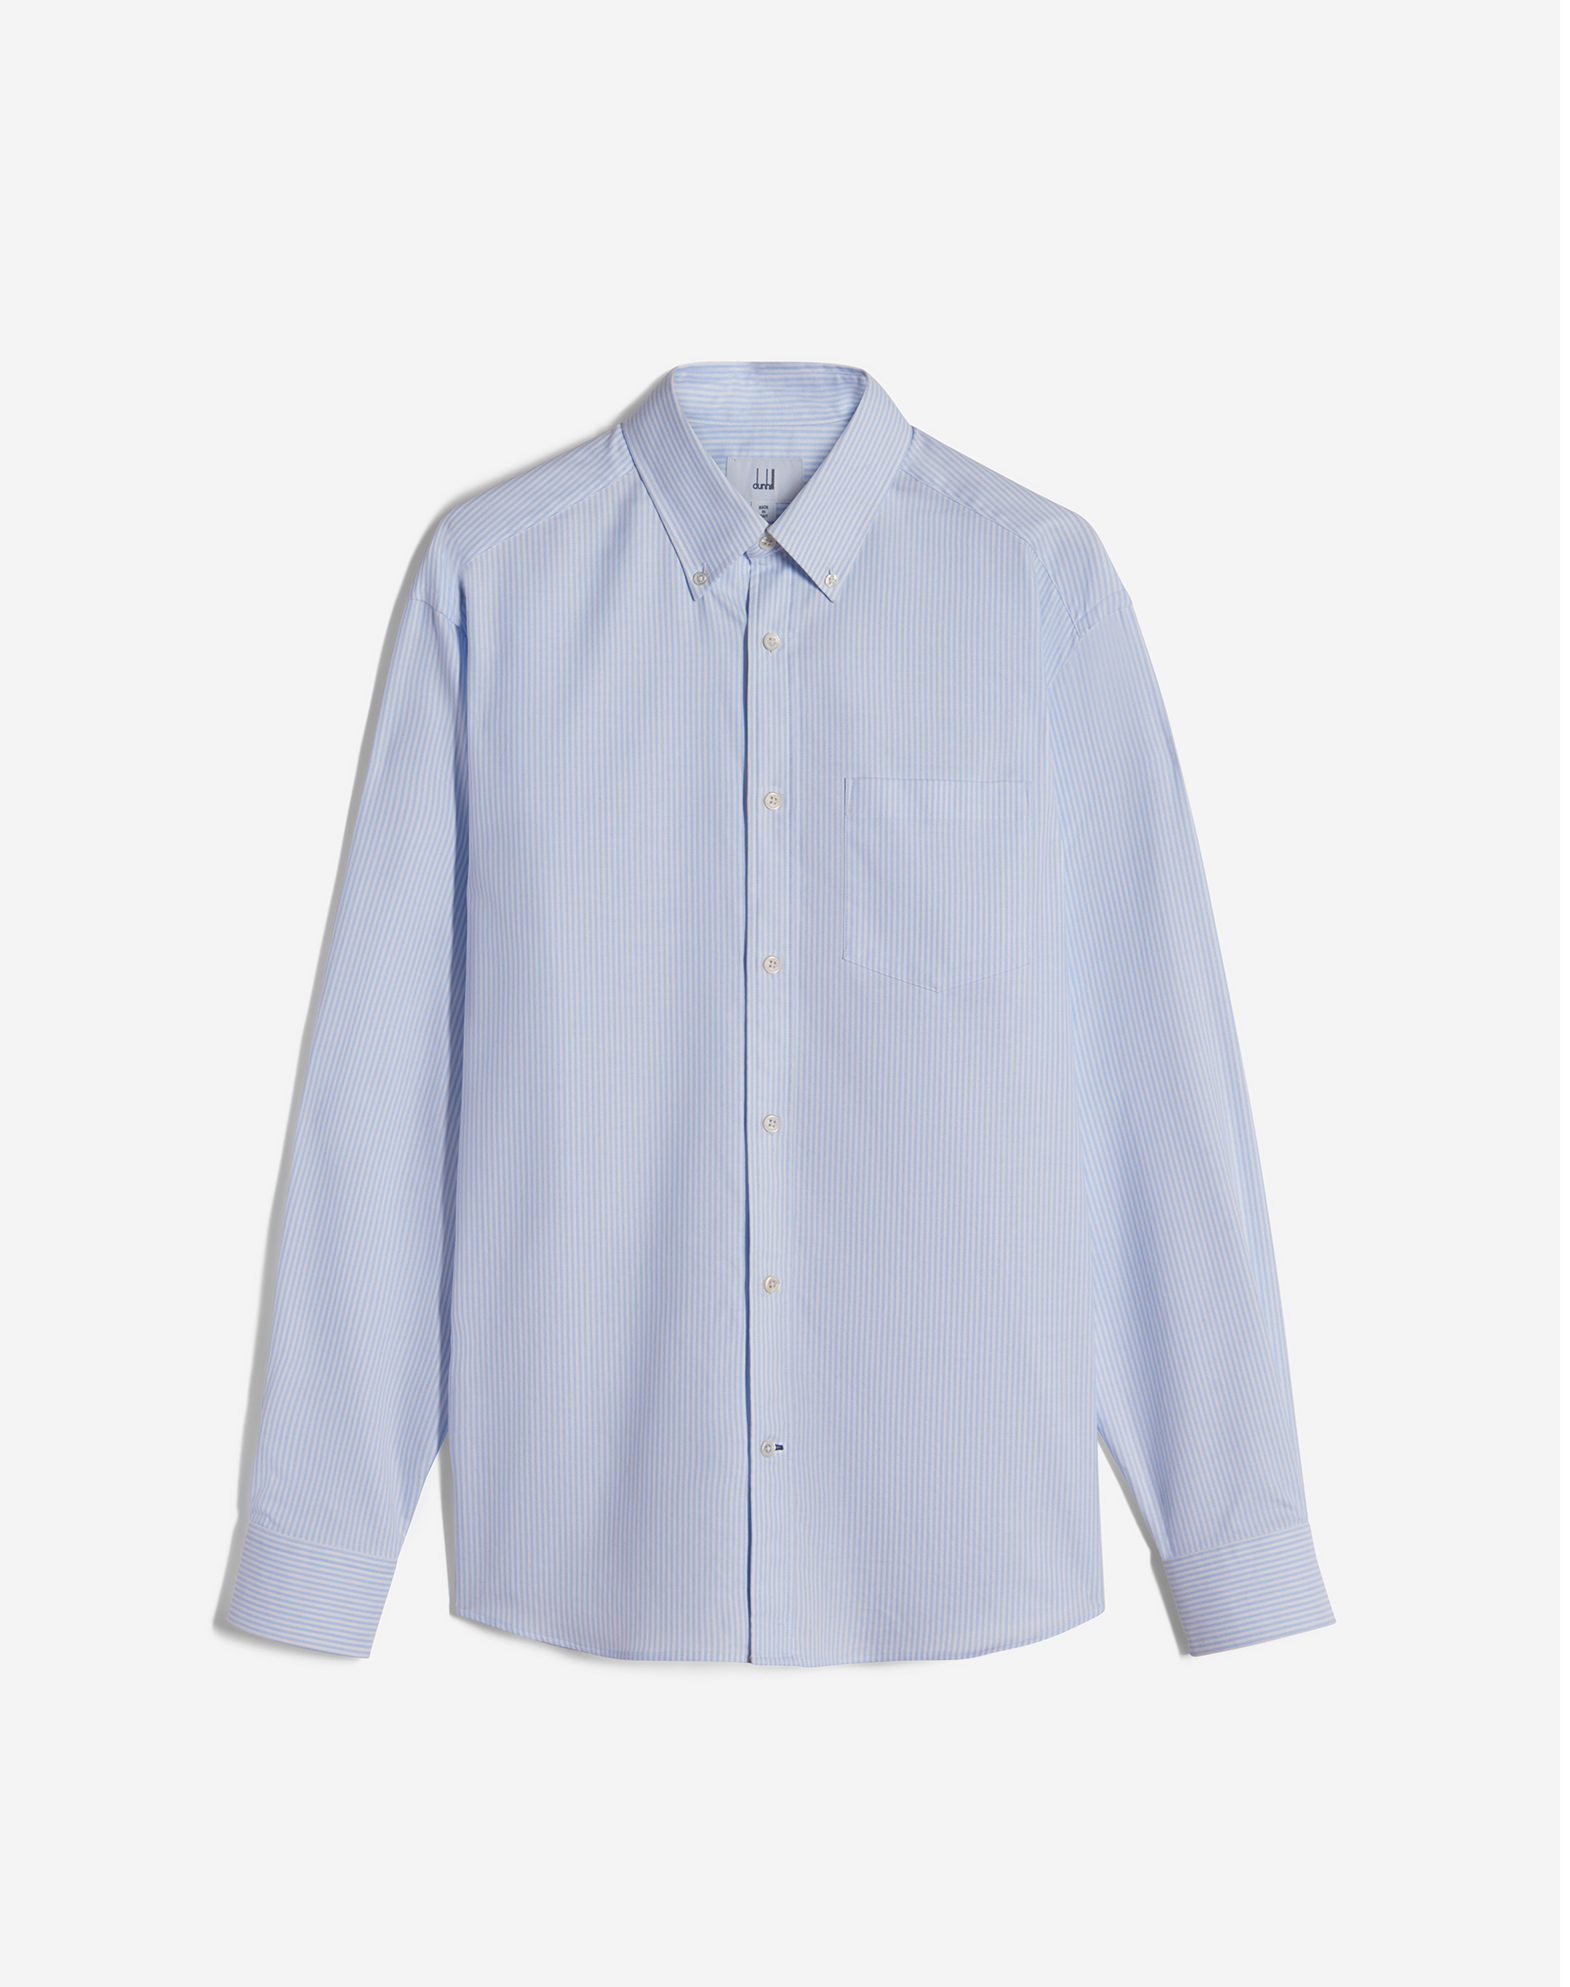 Dunhill Luxury Men's Long Sleeve Casual Shirts